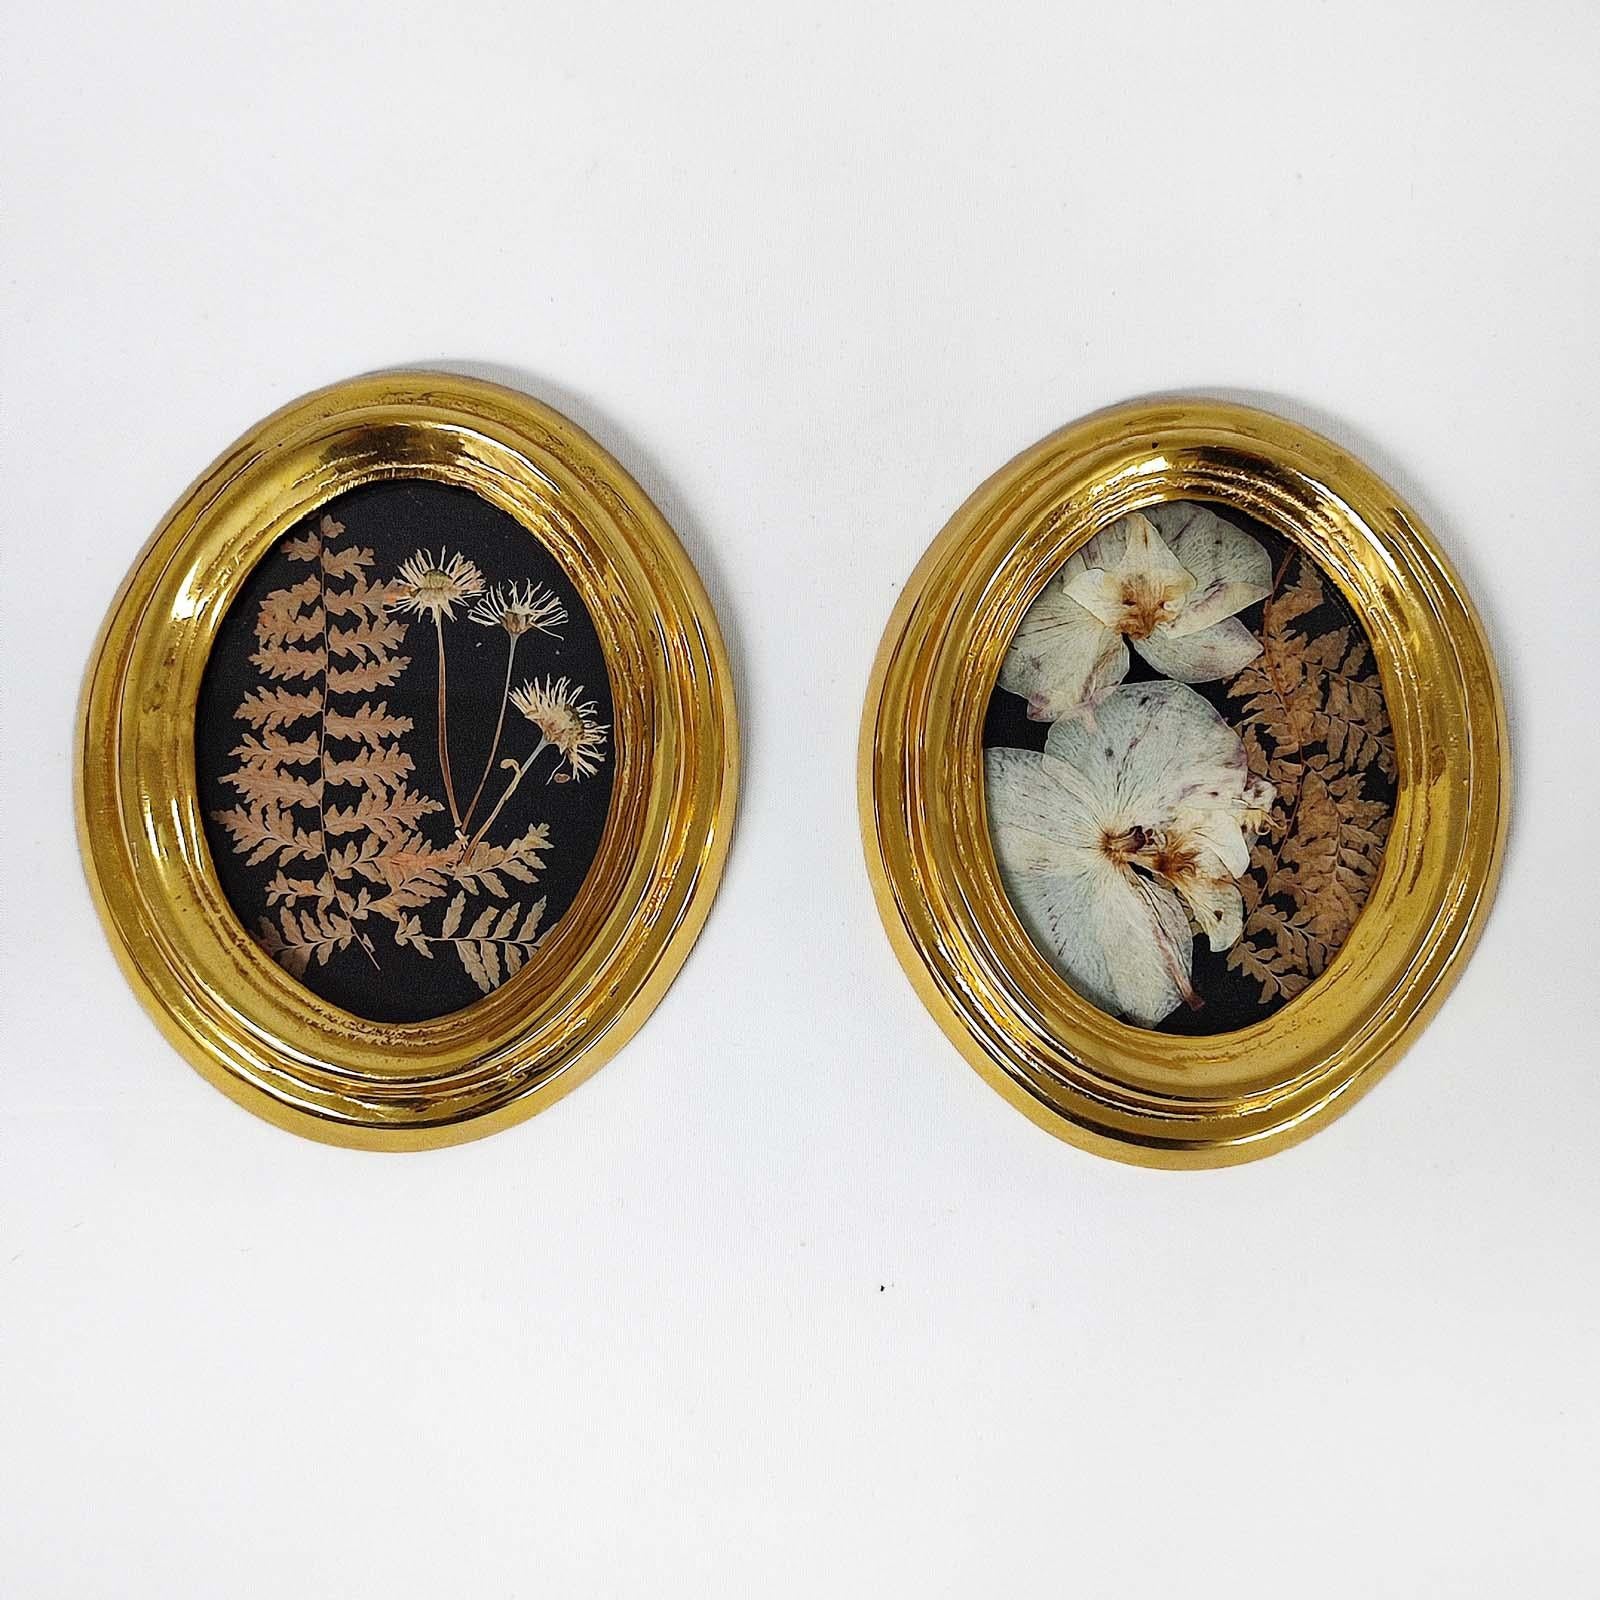 Pair of vintage oval brass frames, inner decor of with real pressed flowers, on a black velvet background. Solid cast brass, 24 K gold plated. With hangers on the backside for wall mounting. Each with original label.
In good overall condition, the